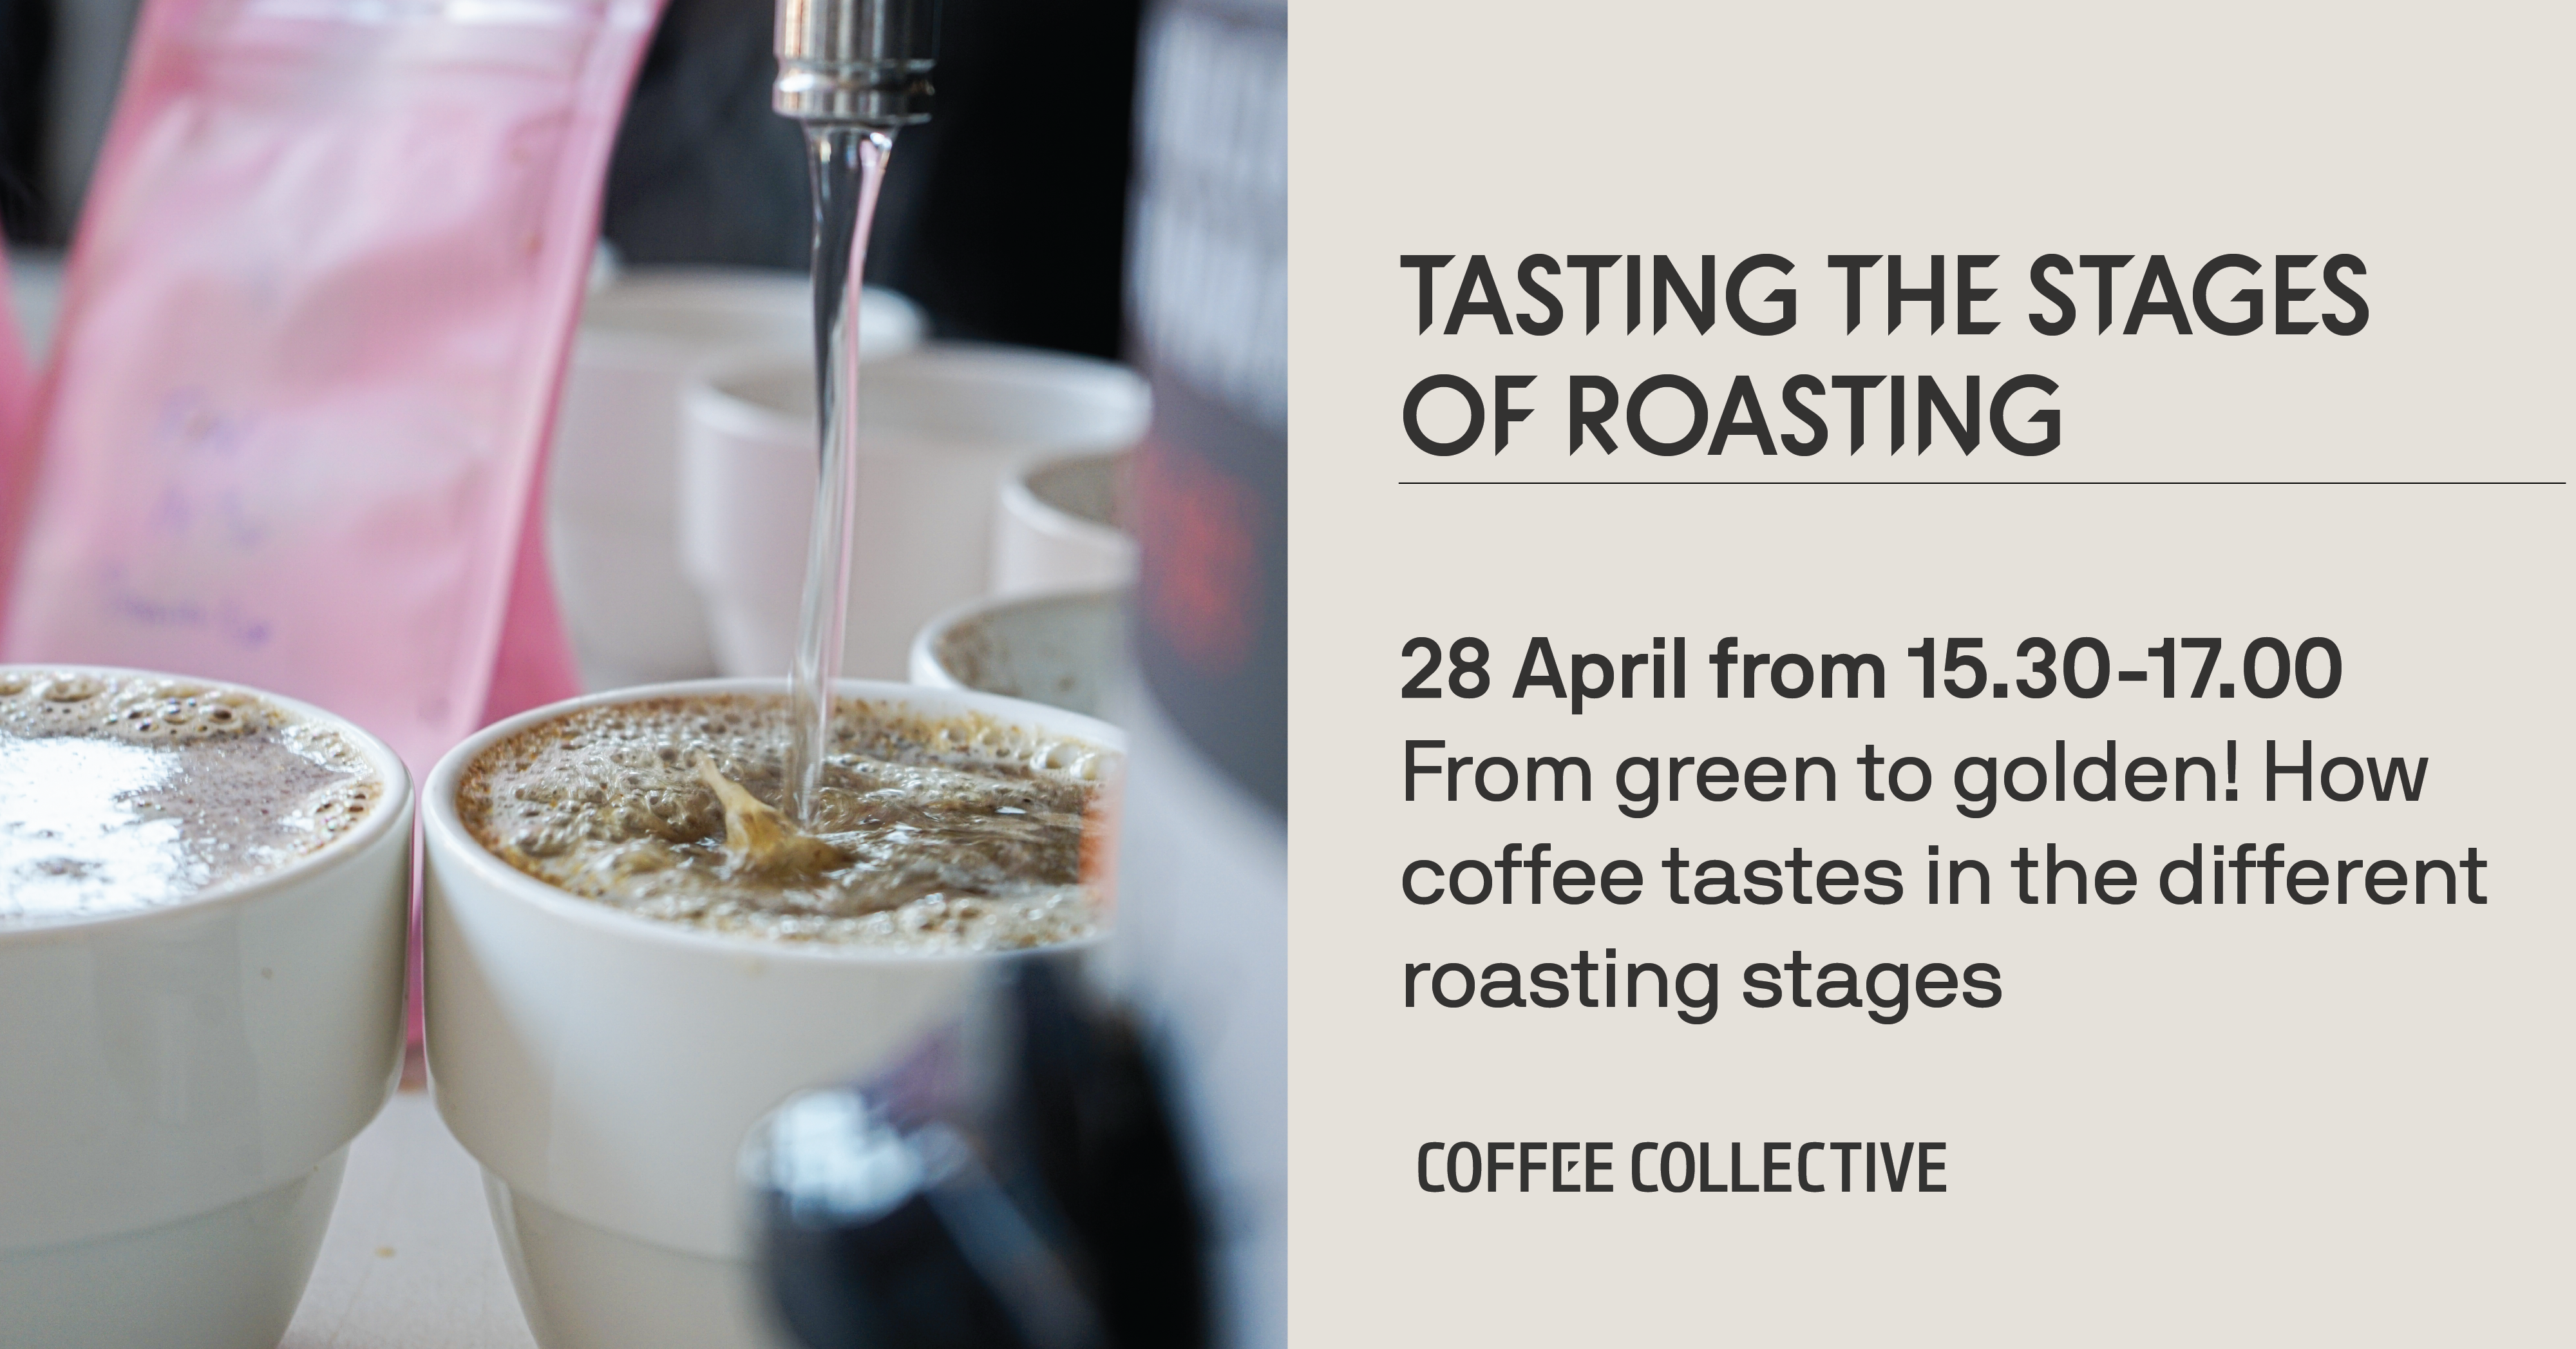 Tasting the different stages of roasting